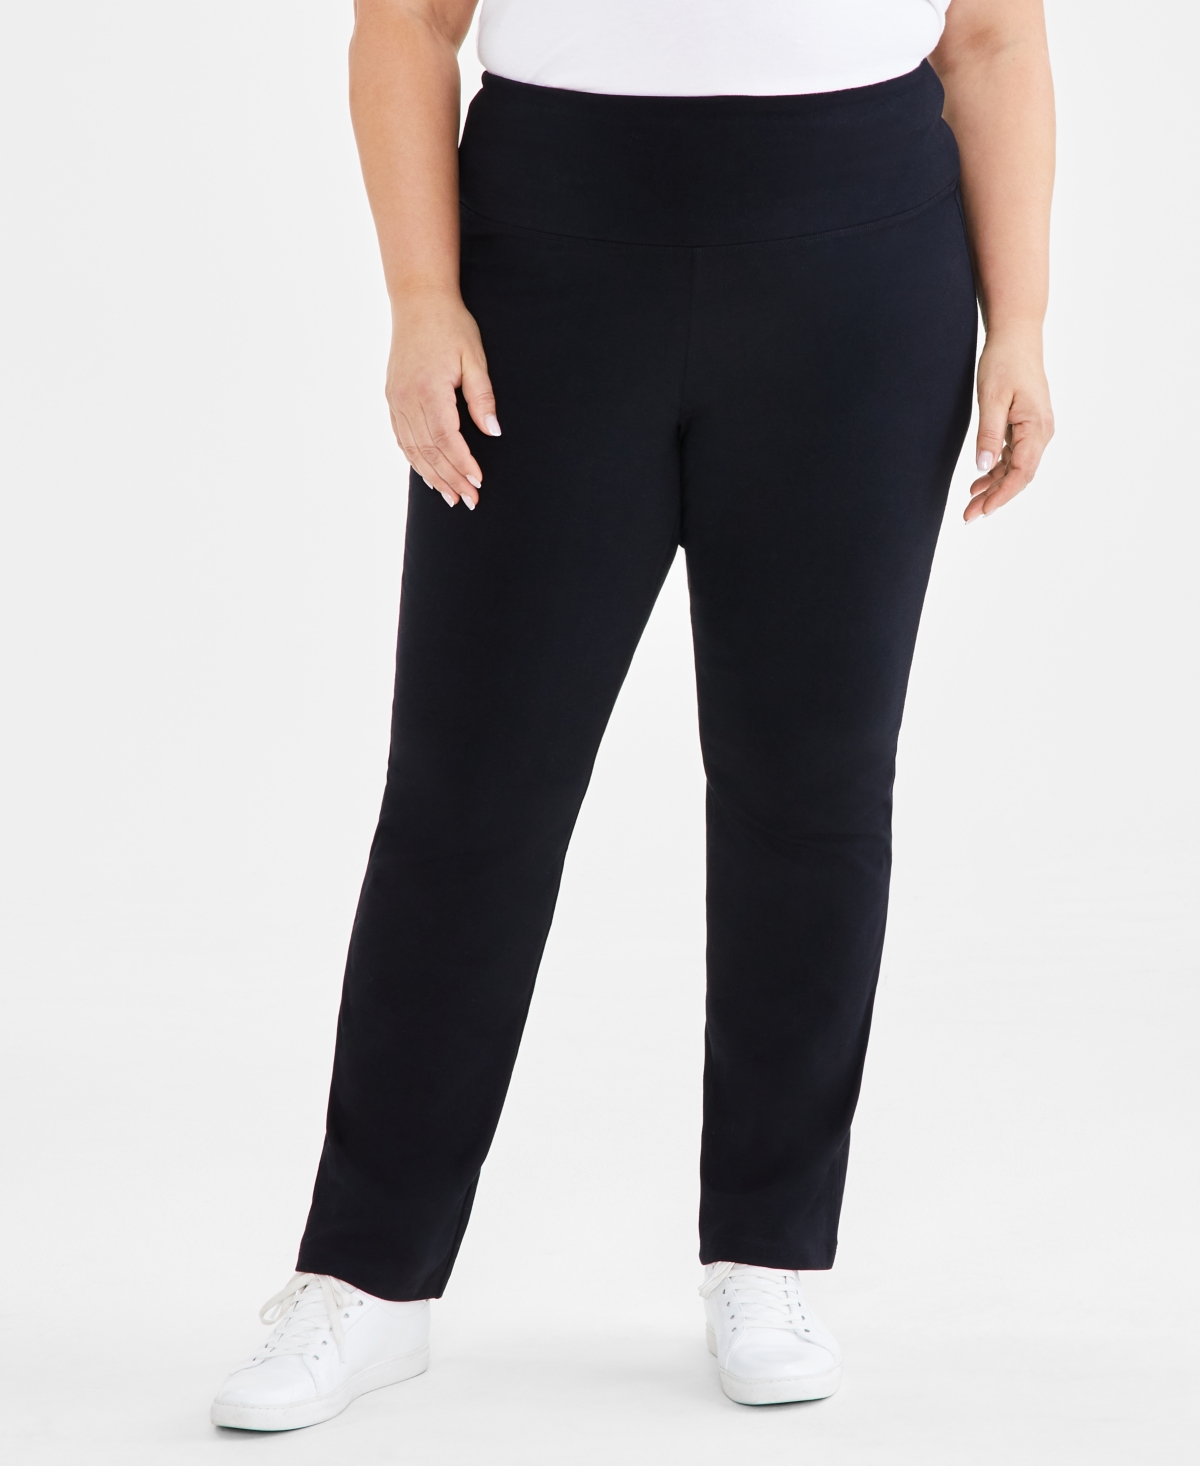 STYLE & CO PLUS SIZE HIGH-RISE BOOTCUT LEGGINGS, CREATED FOR MACY'S